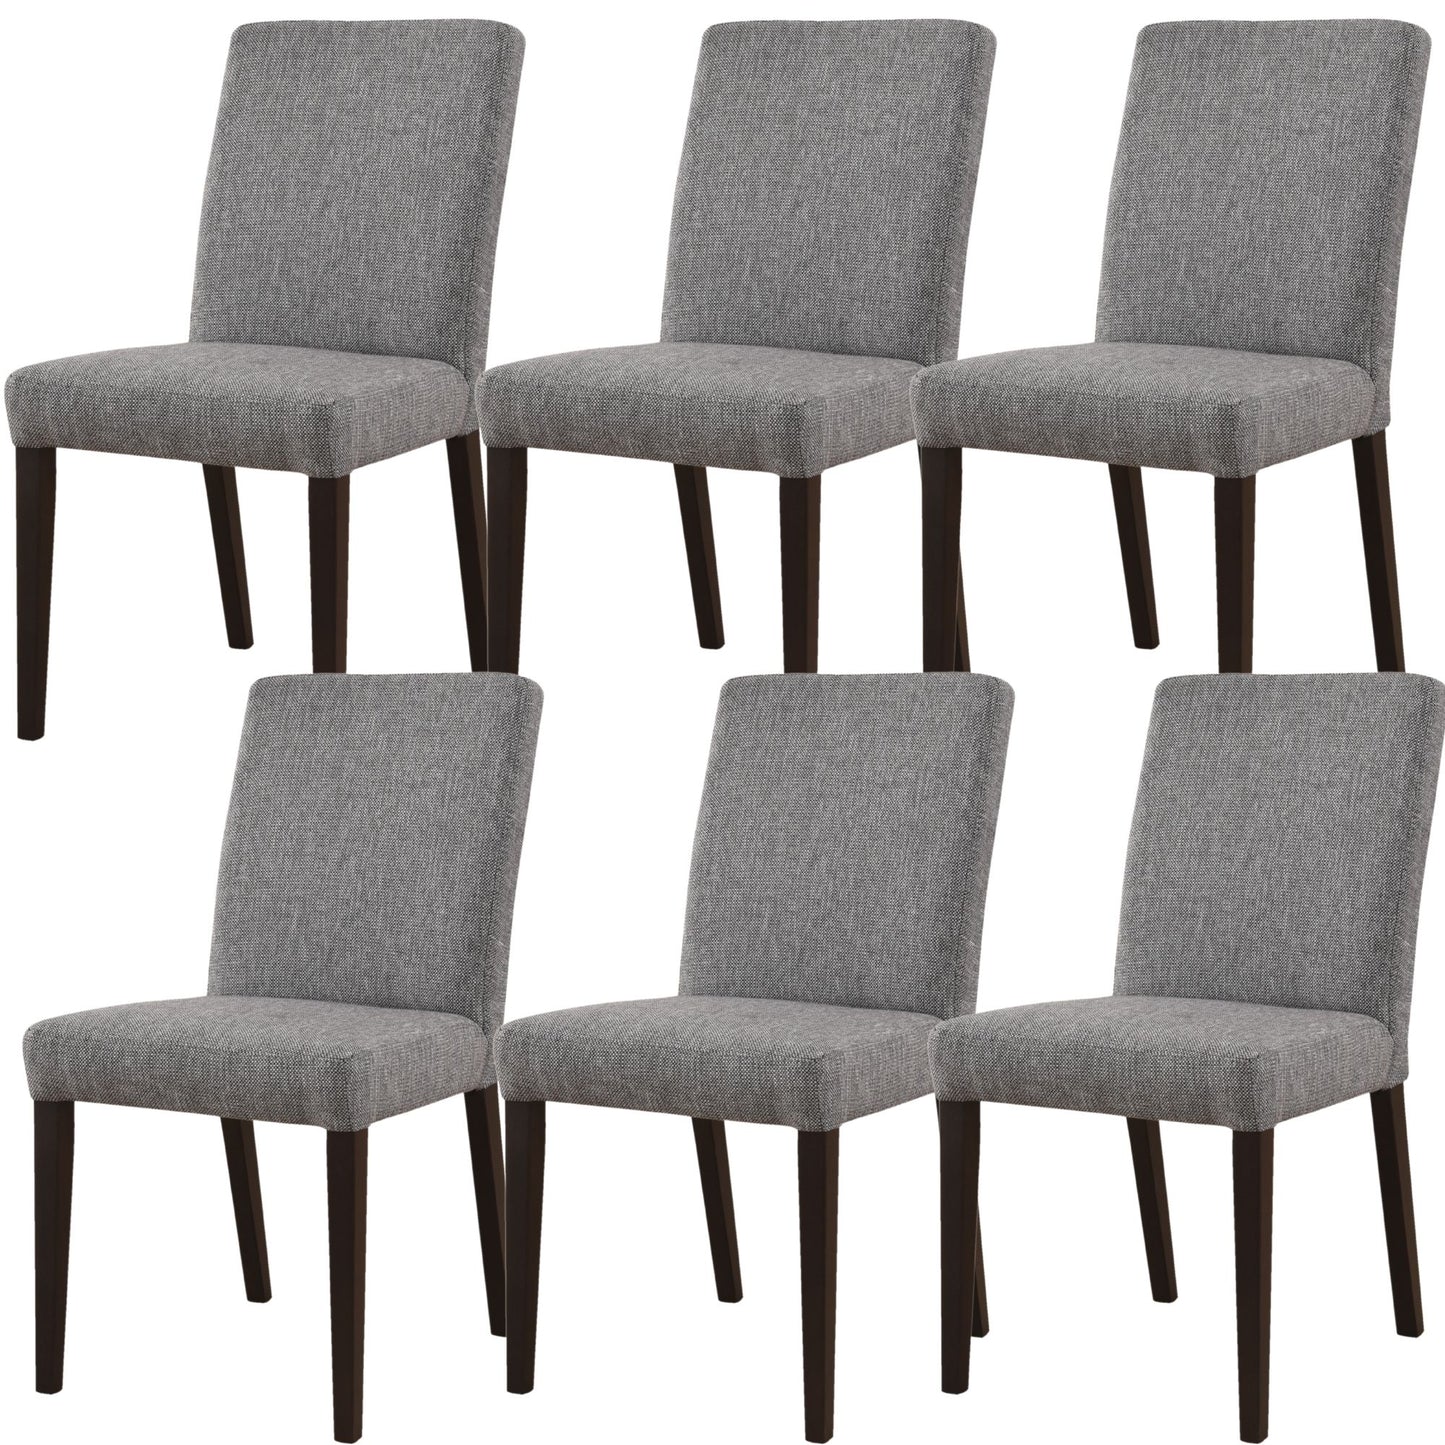 Set of 6 Fabric Upholstered Solid Wood Dining Chairs - Granite